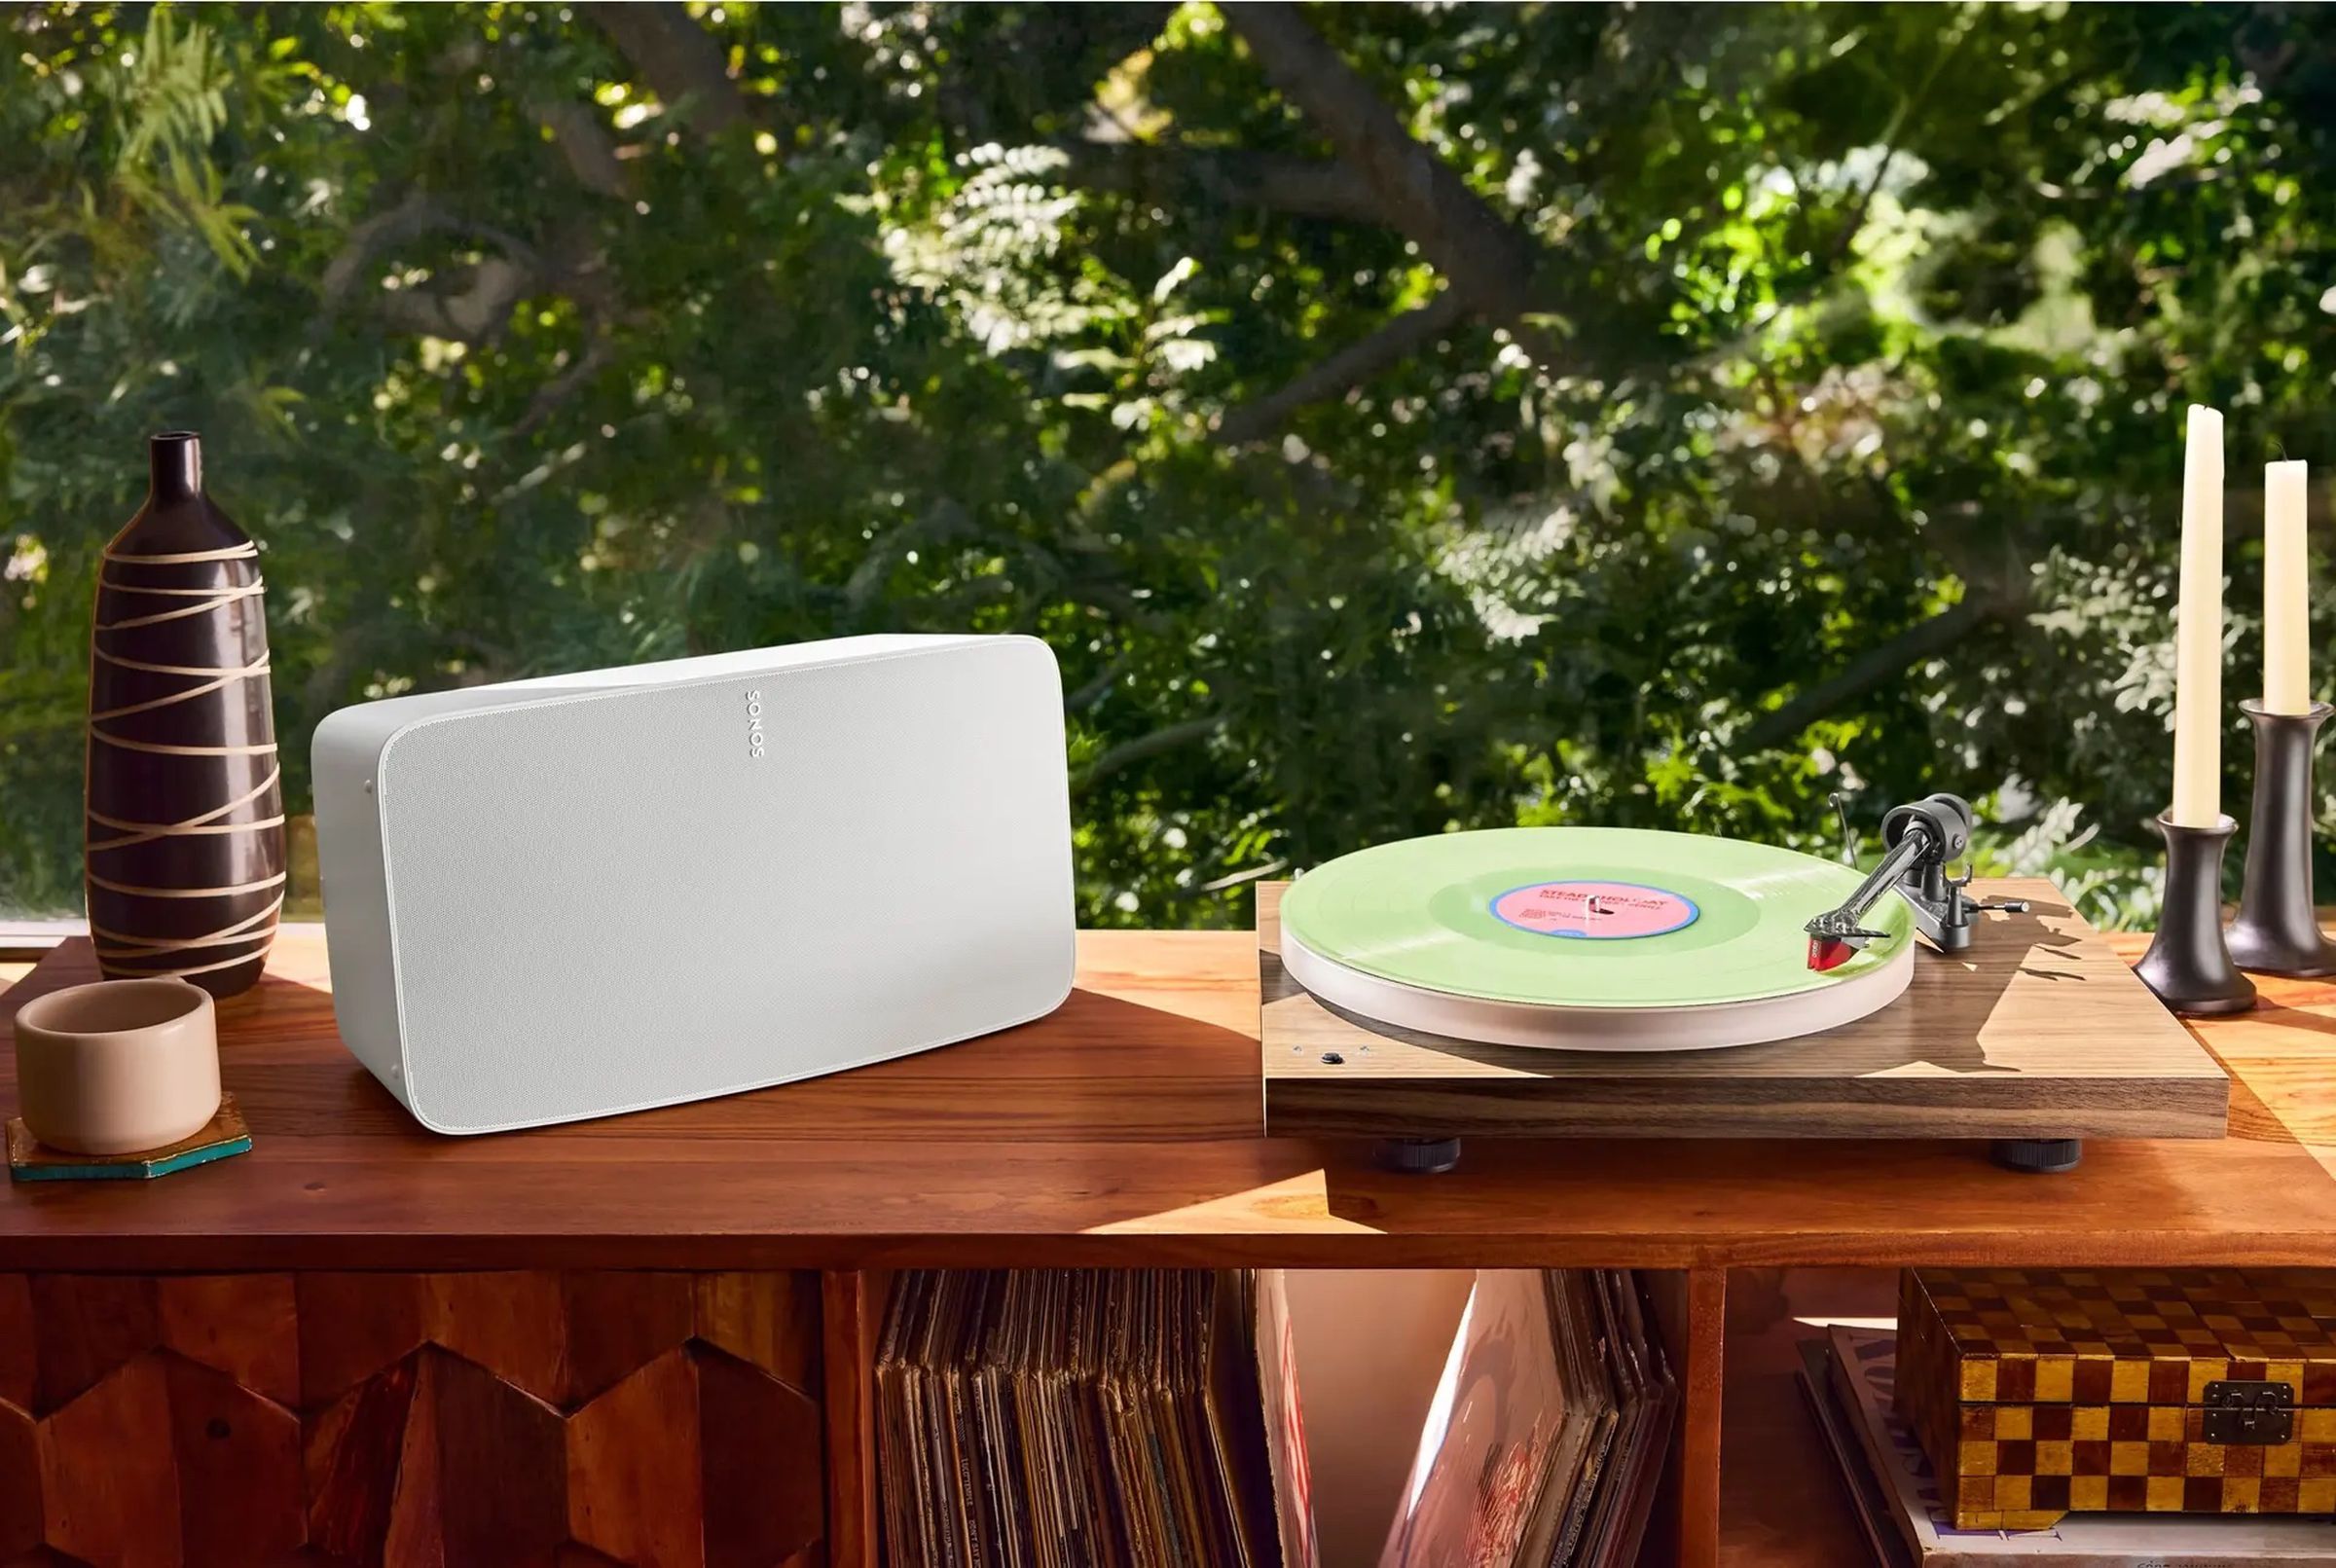 A photo of a Sonos Five next to a record player on a wooden table.